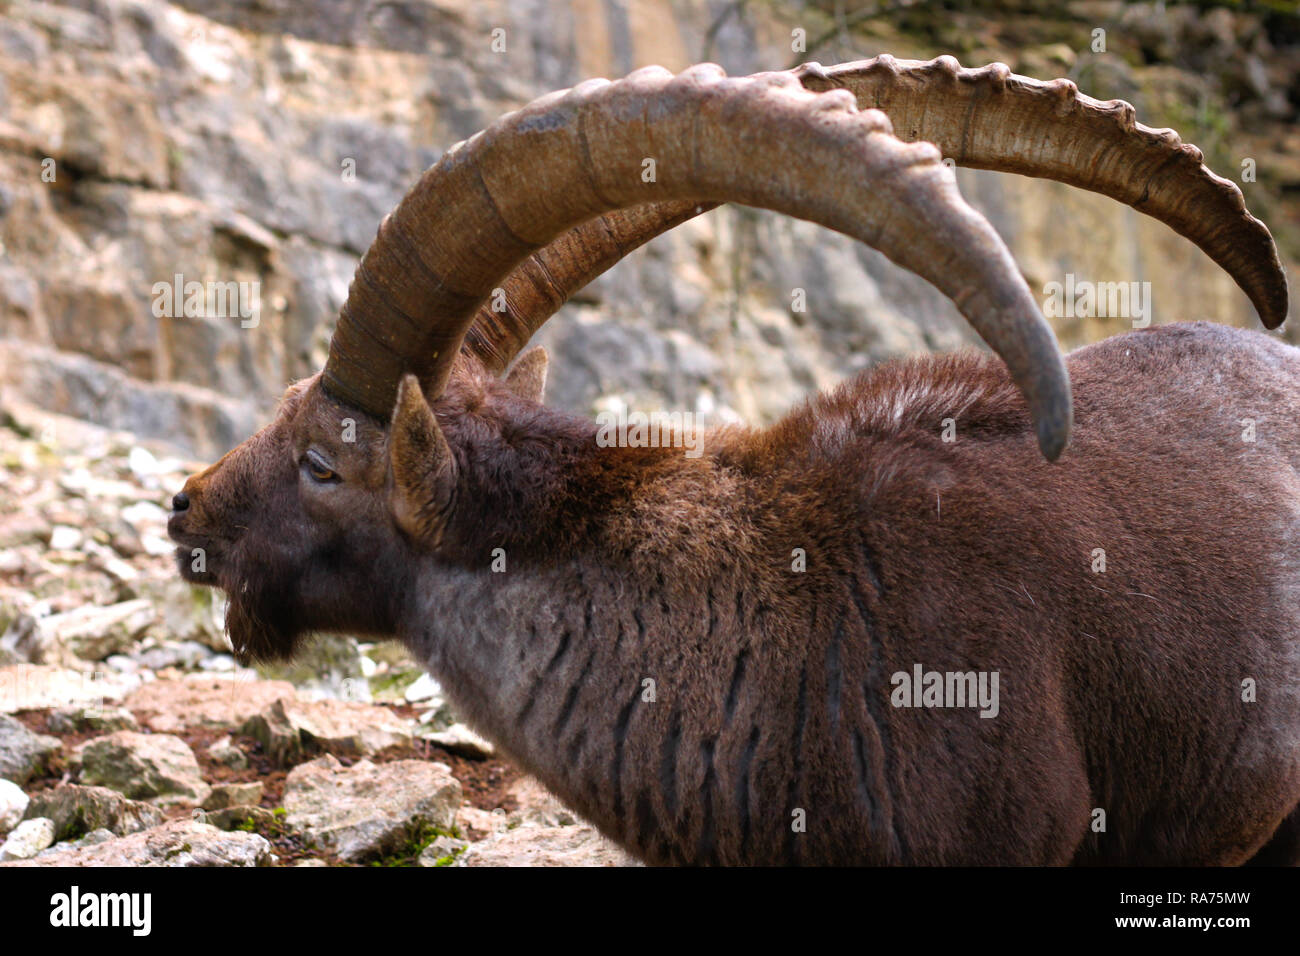 The ibex is a kind of wild goat living in the alps. Male ibexes have huge horns indicating their age. Stock Photo